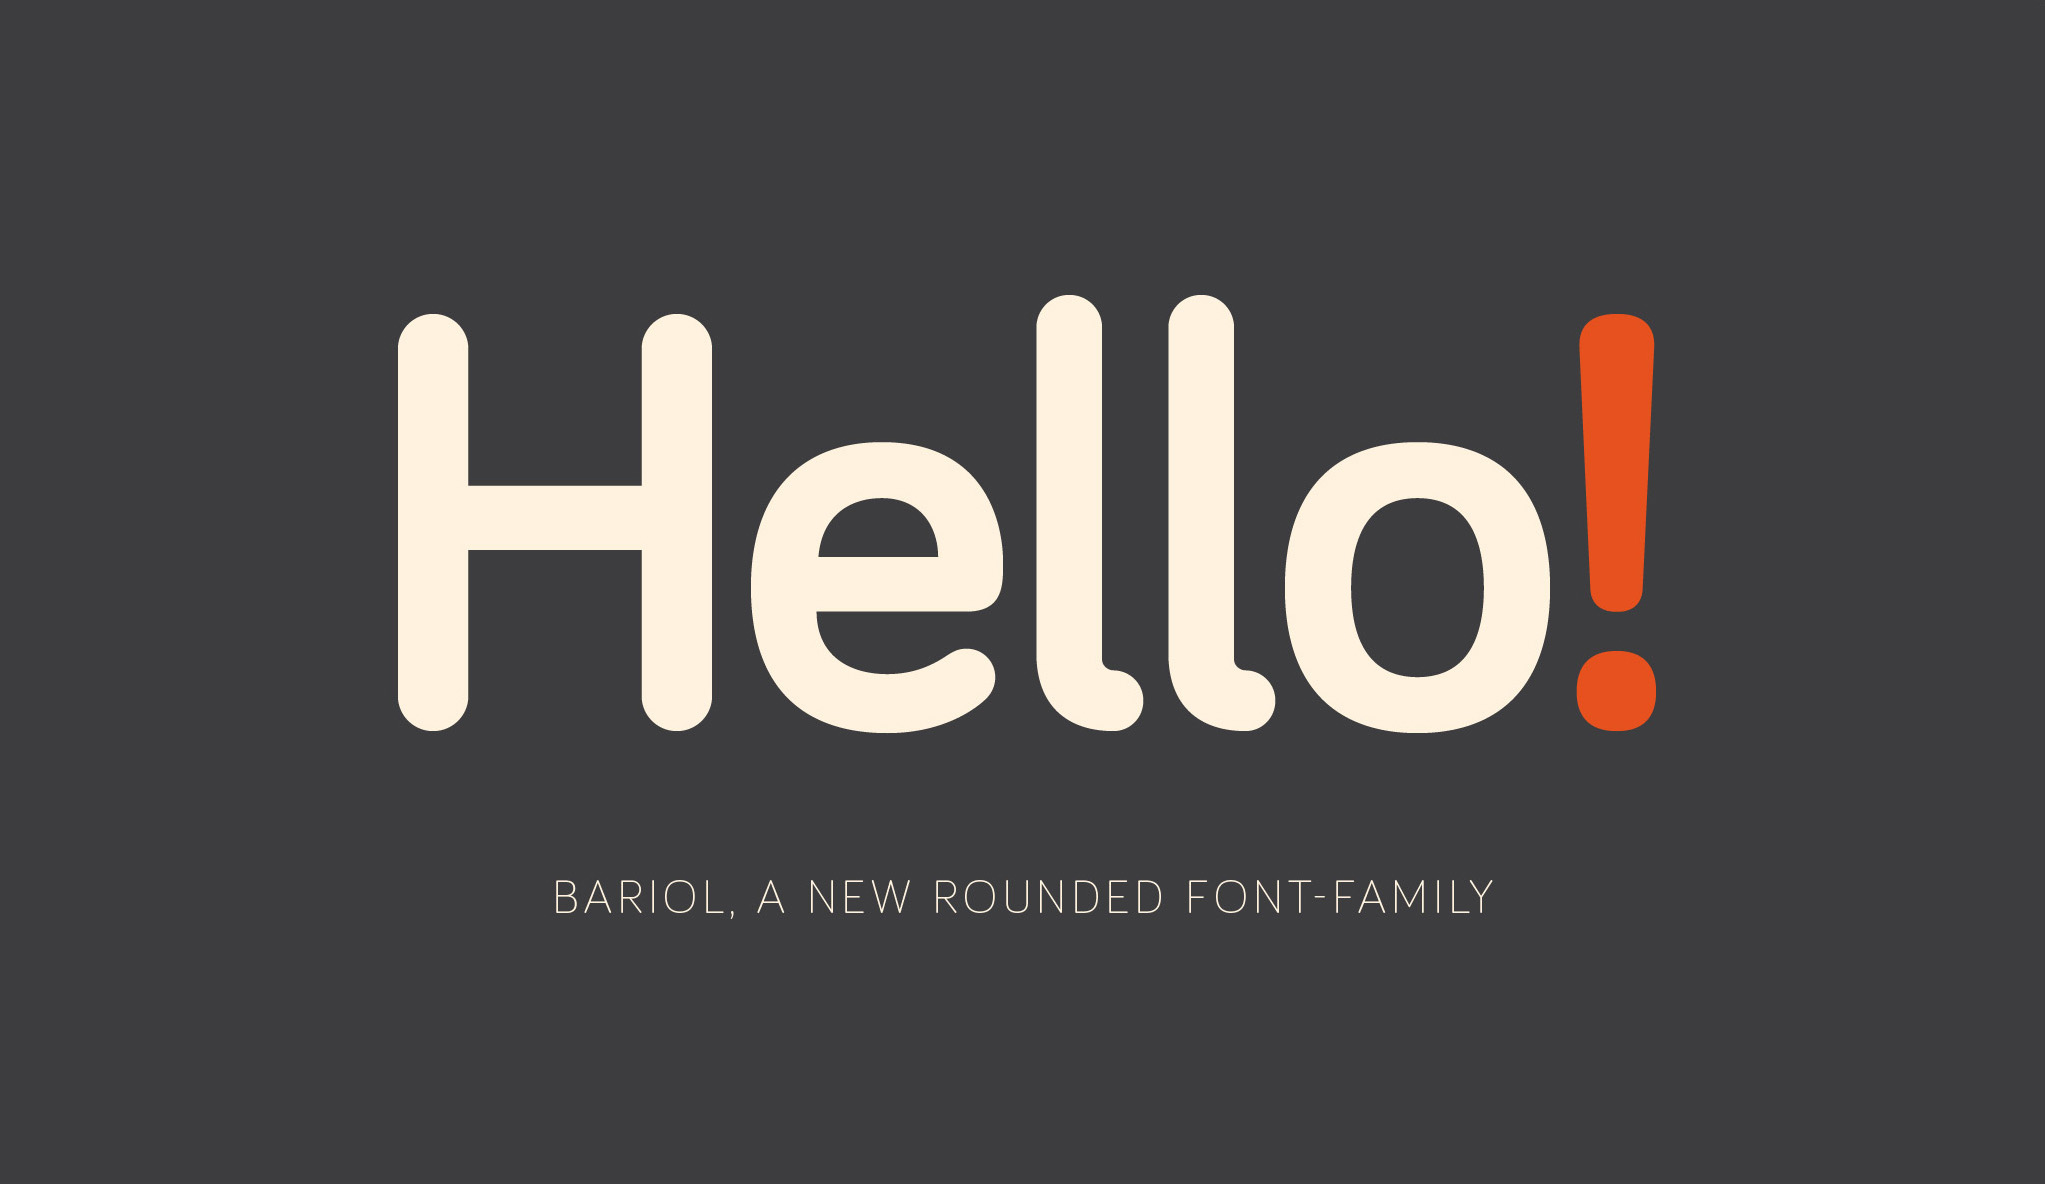 A free rounded font family